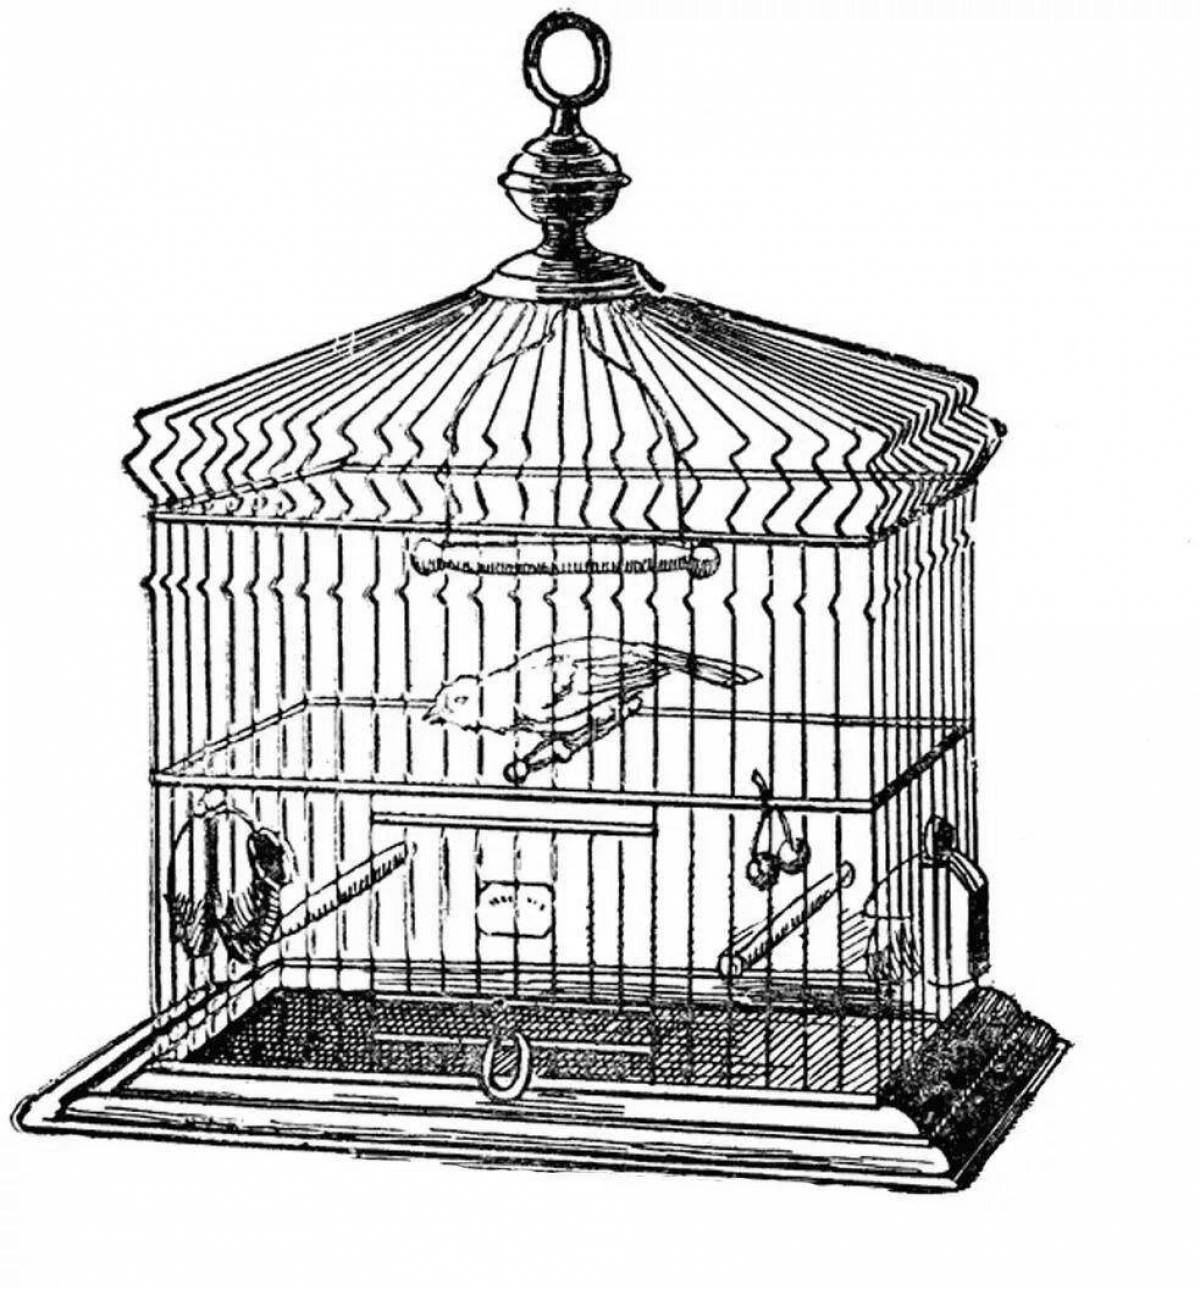 Bright parrot in a cage